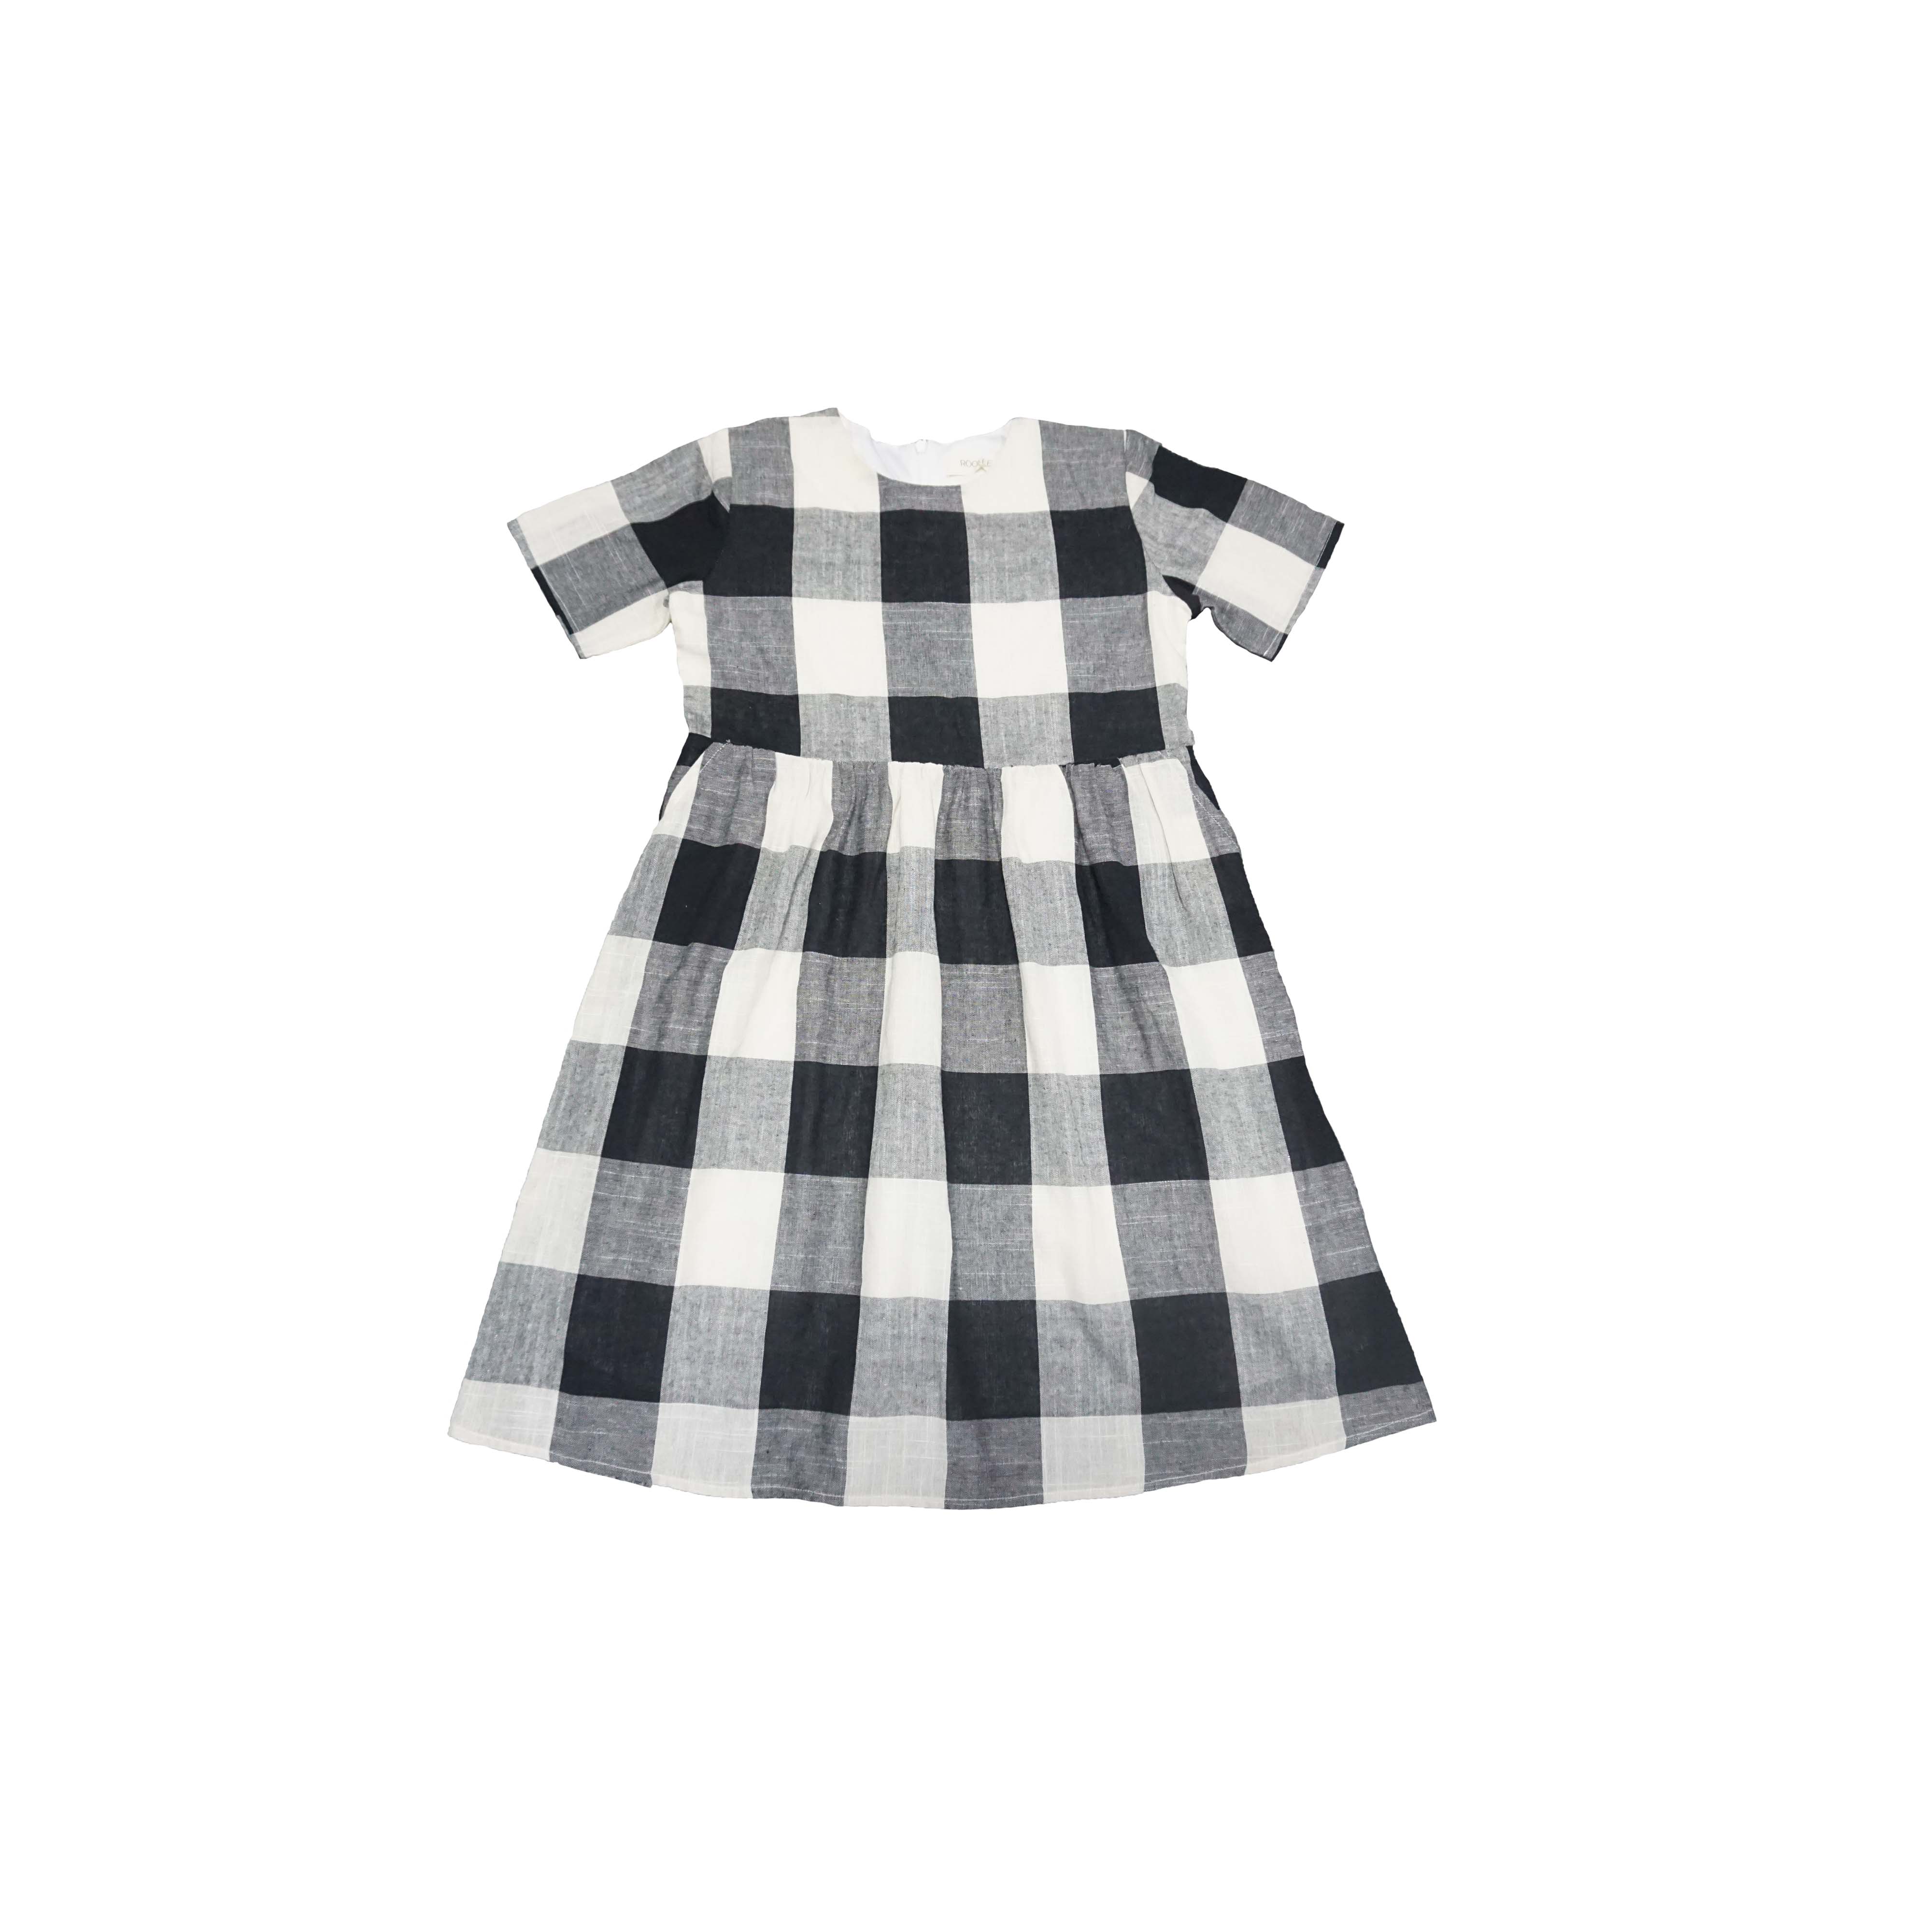 Simple round neck short-sleeved black and gray plaid kids dress